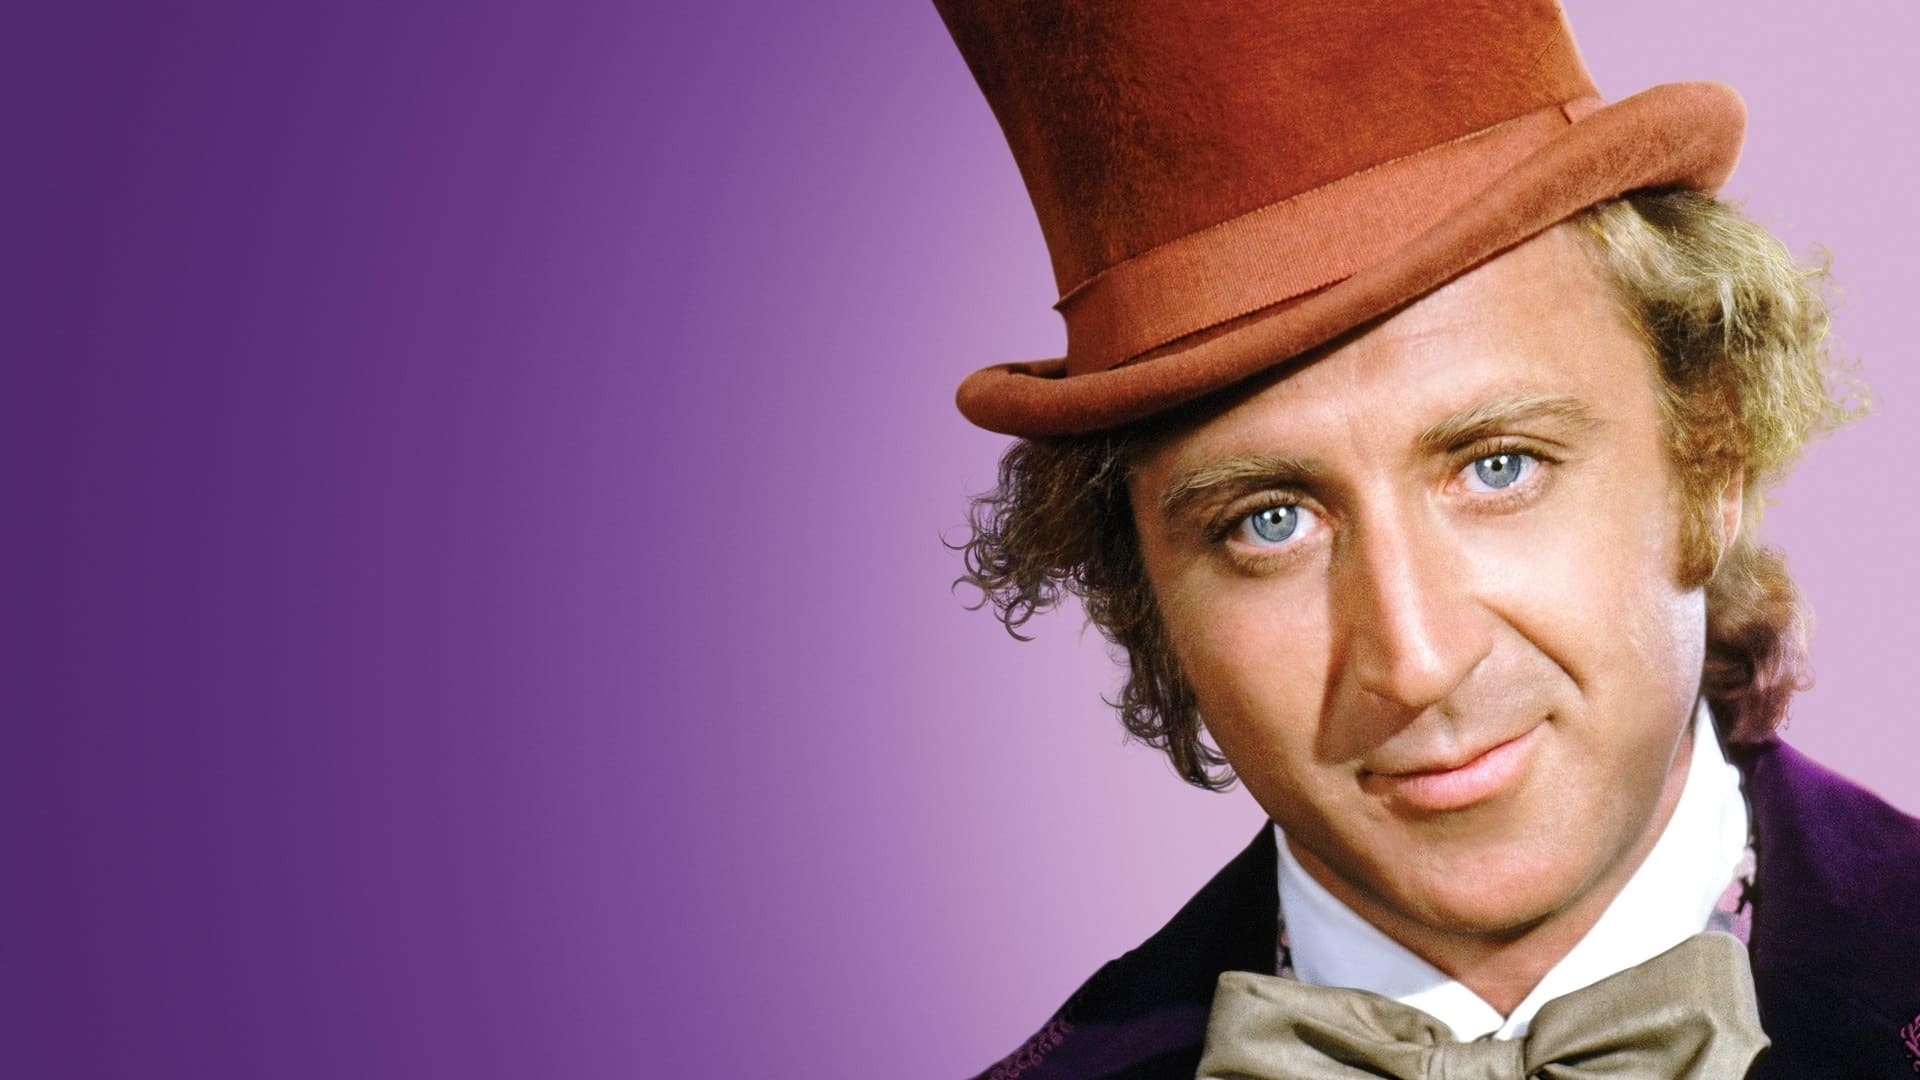 Willy Wonka, Willy Wonka and the Chocolate Factory, Backdrops, Movie database, 1920x1080 Full HD Desktop